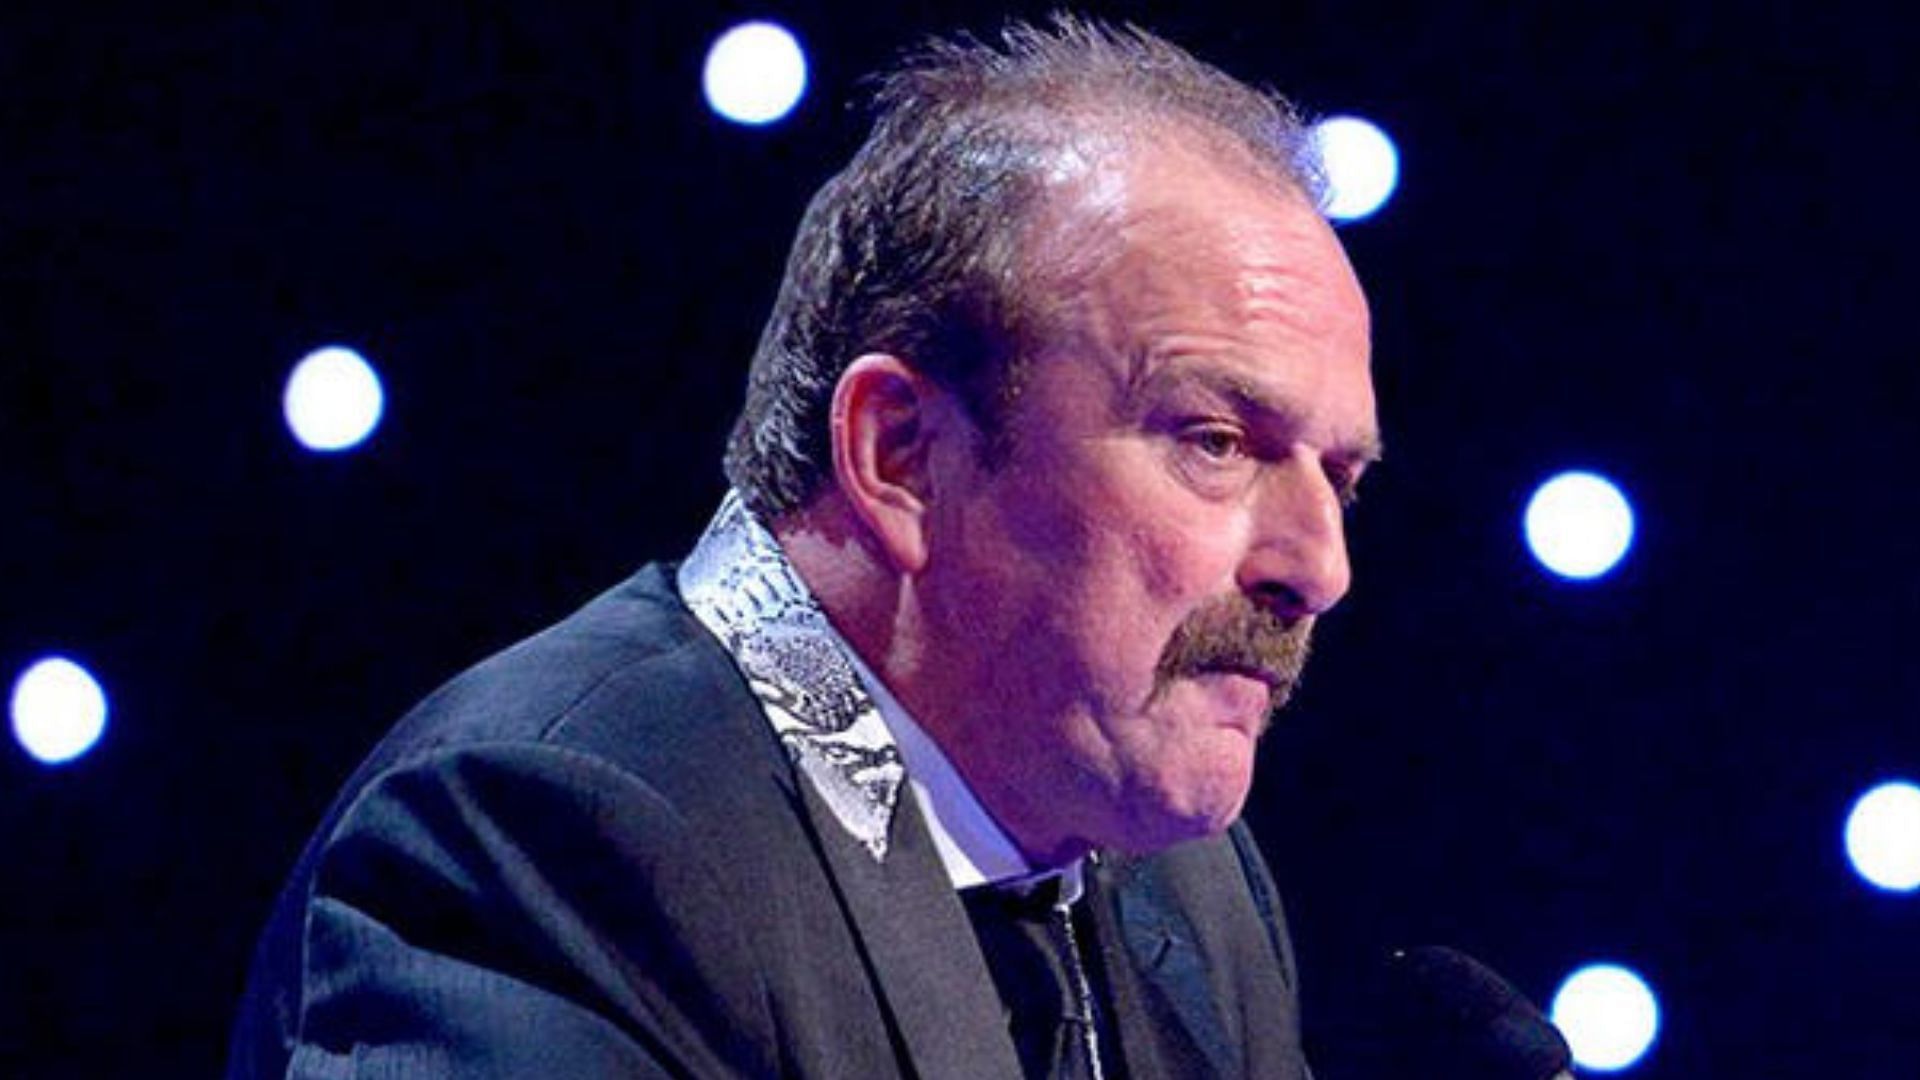 Jake Roberts got inducted to the WWE Hall of Fame in 2014